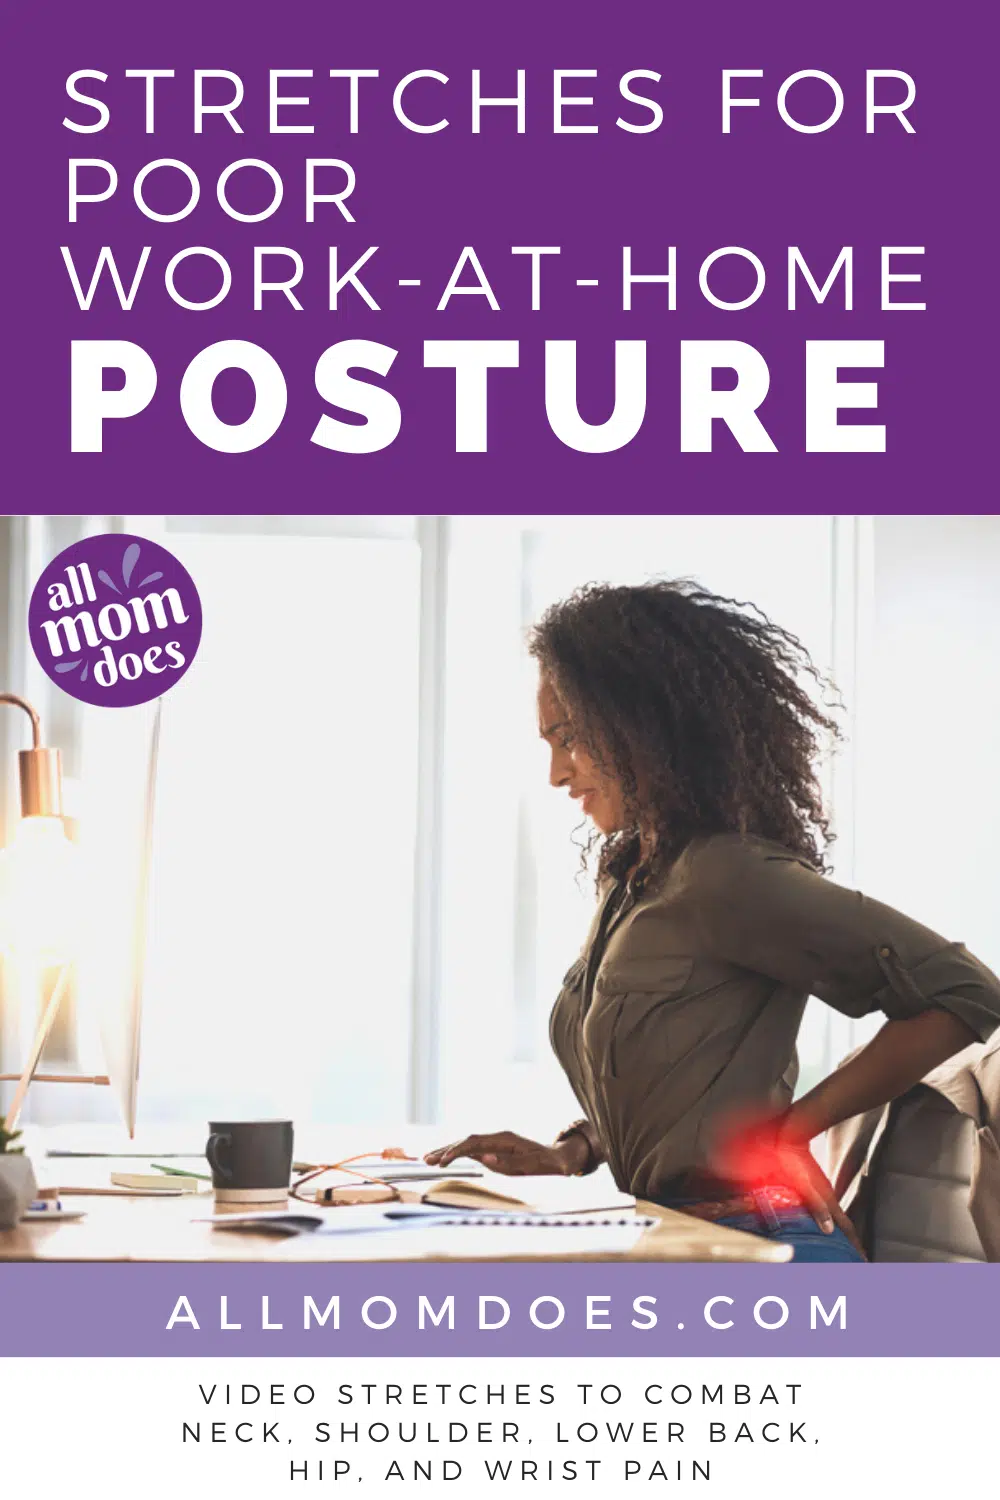 Video tutorial stretches for pain from sitting at a desk. Back pain, neck pain, shoulder pain, hip pain. 